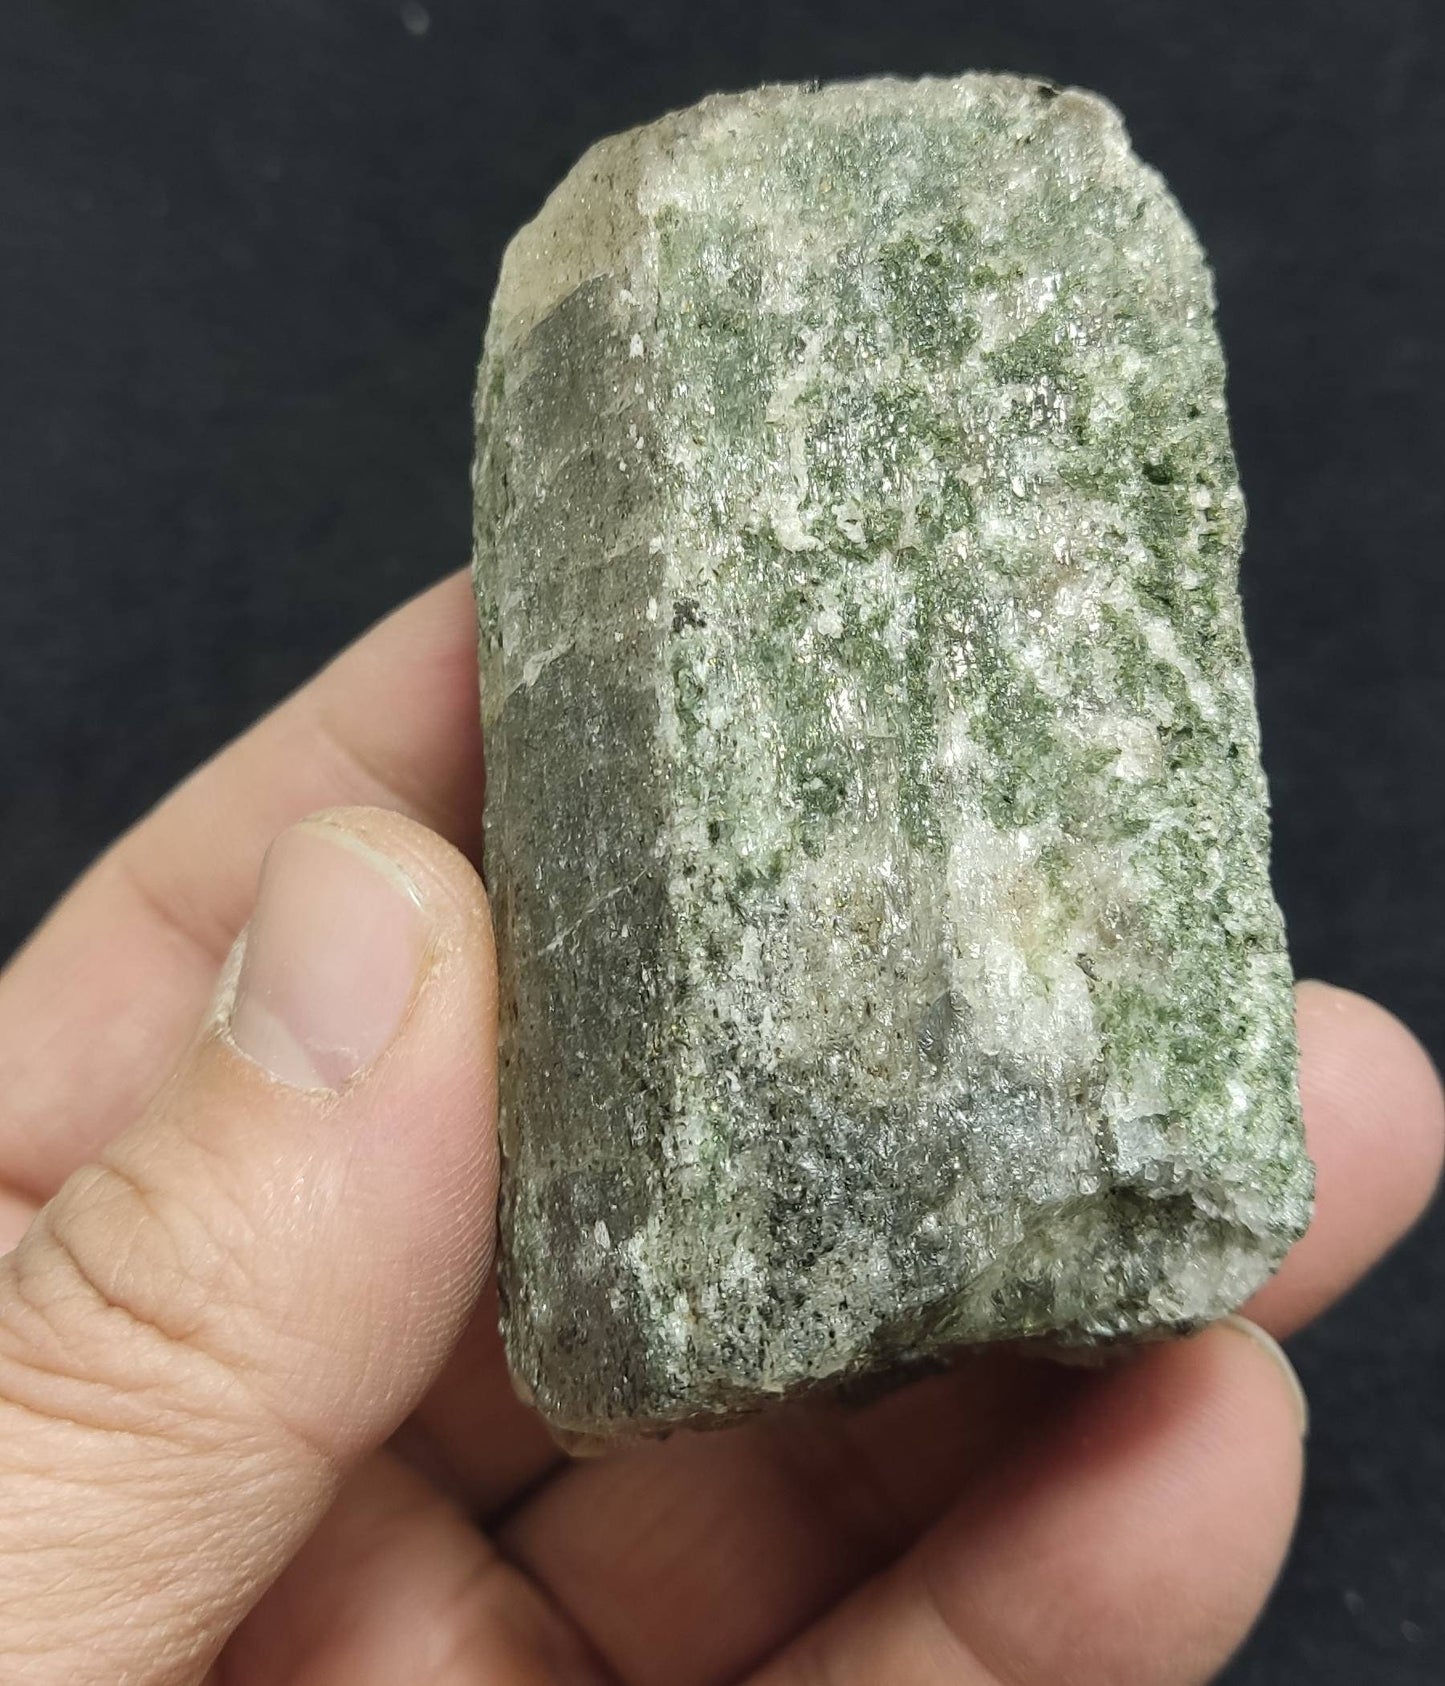 Scapolite crystal with associated epidote 253 grams